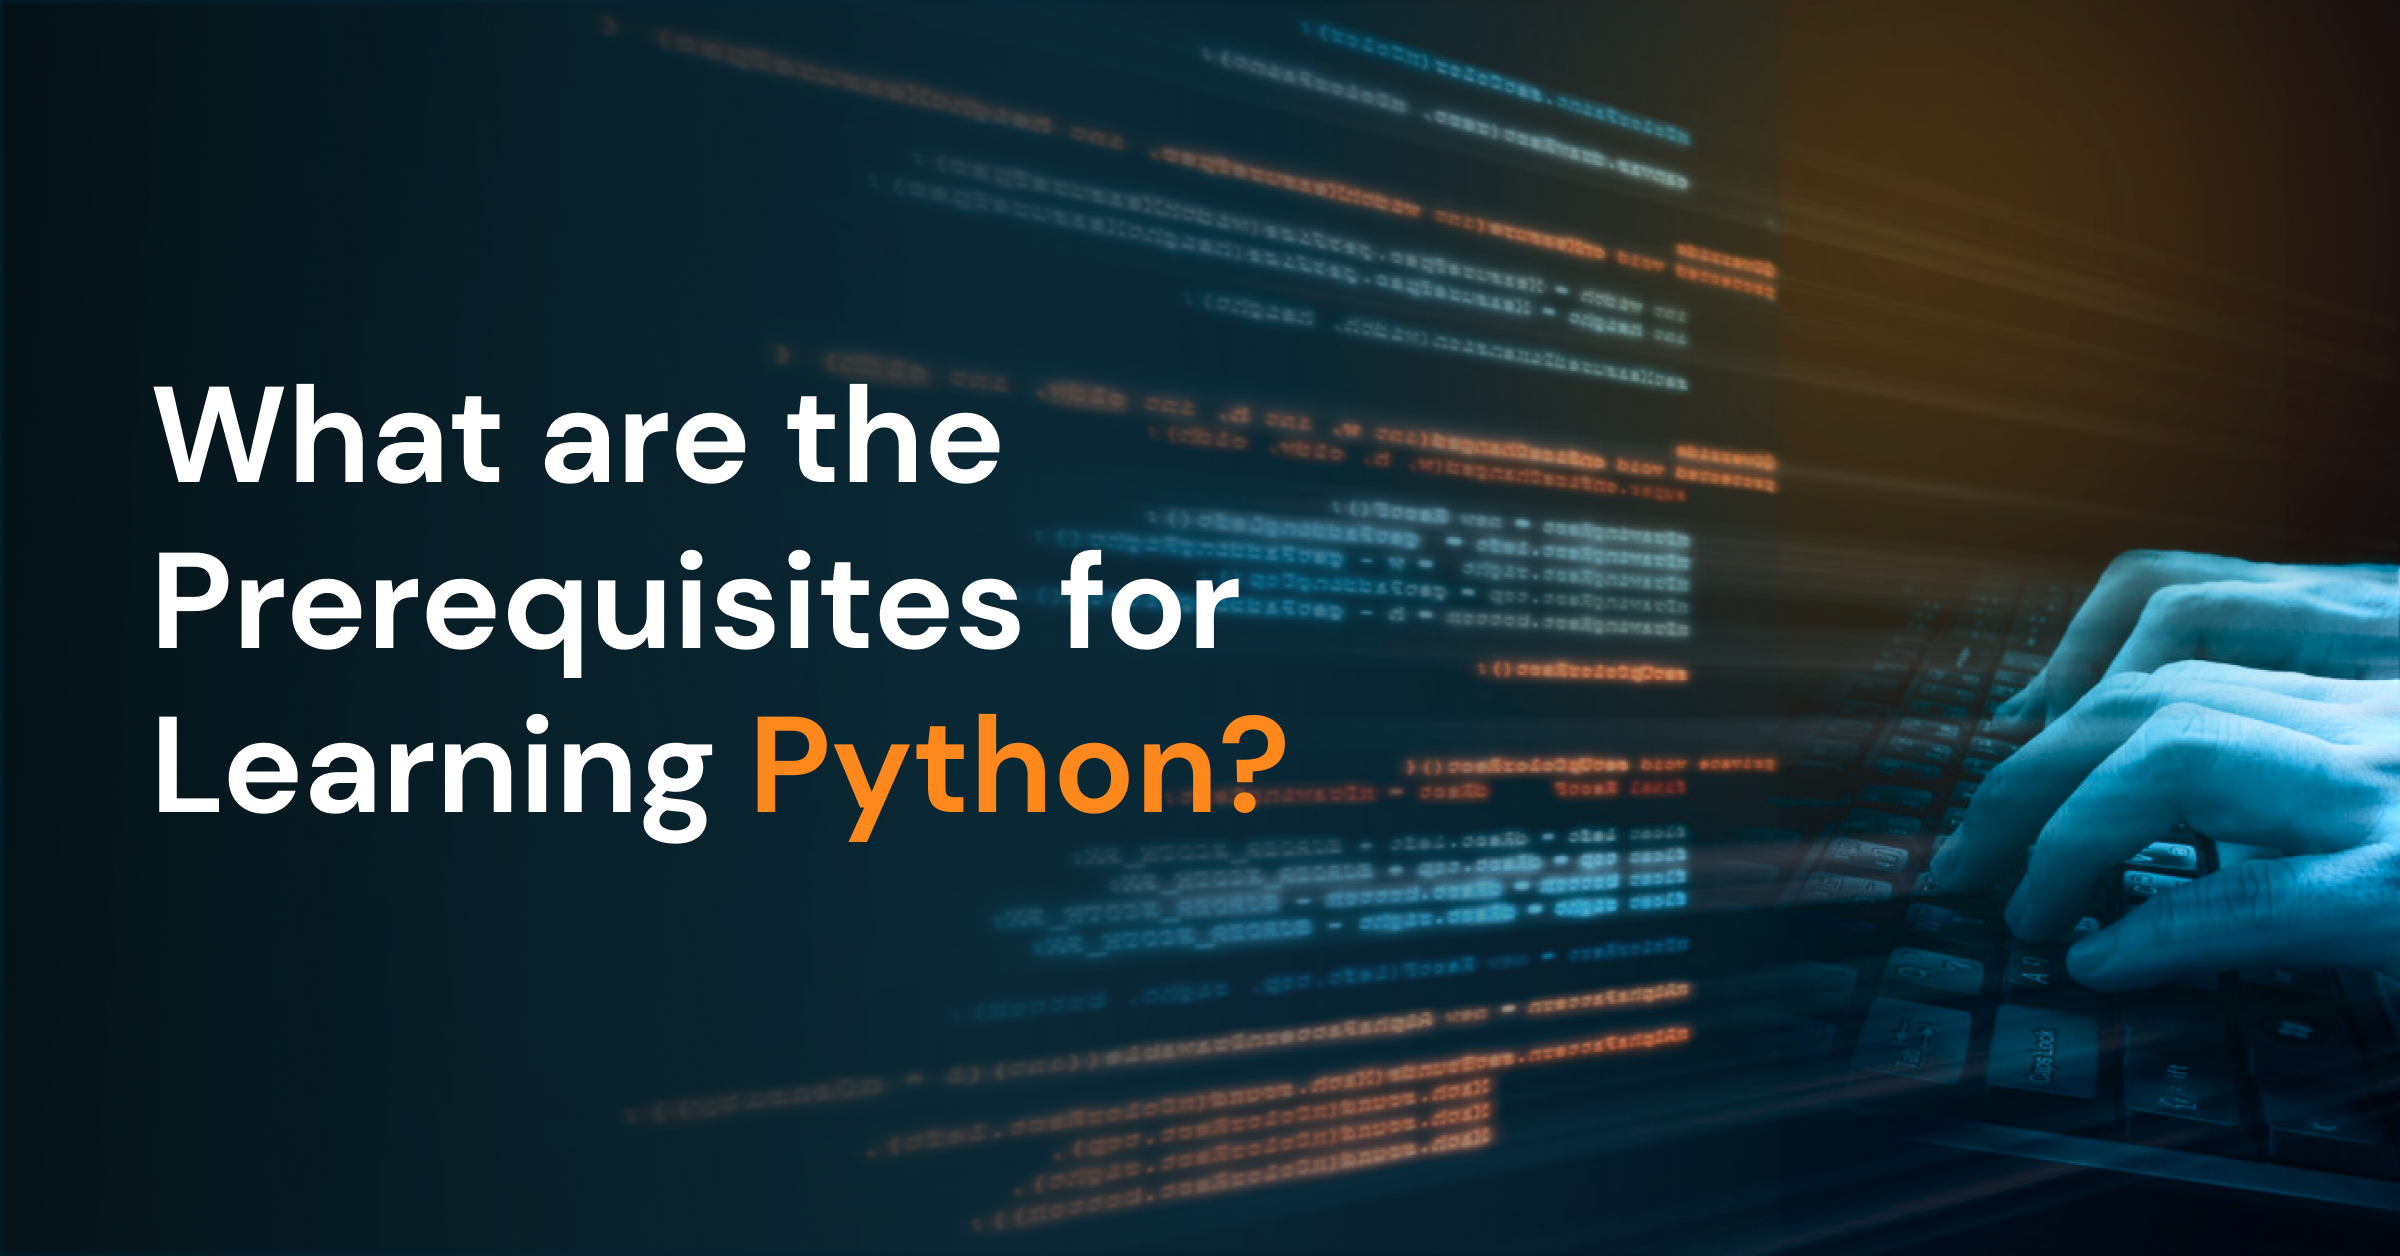 Prerequisites for Learning Python